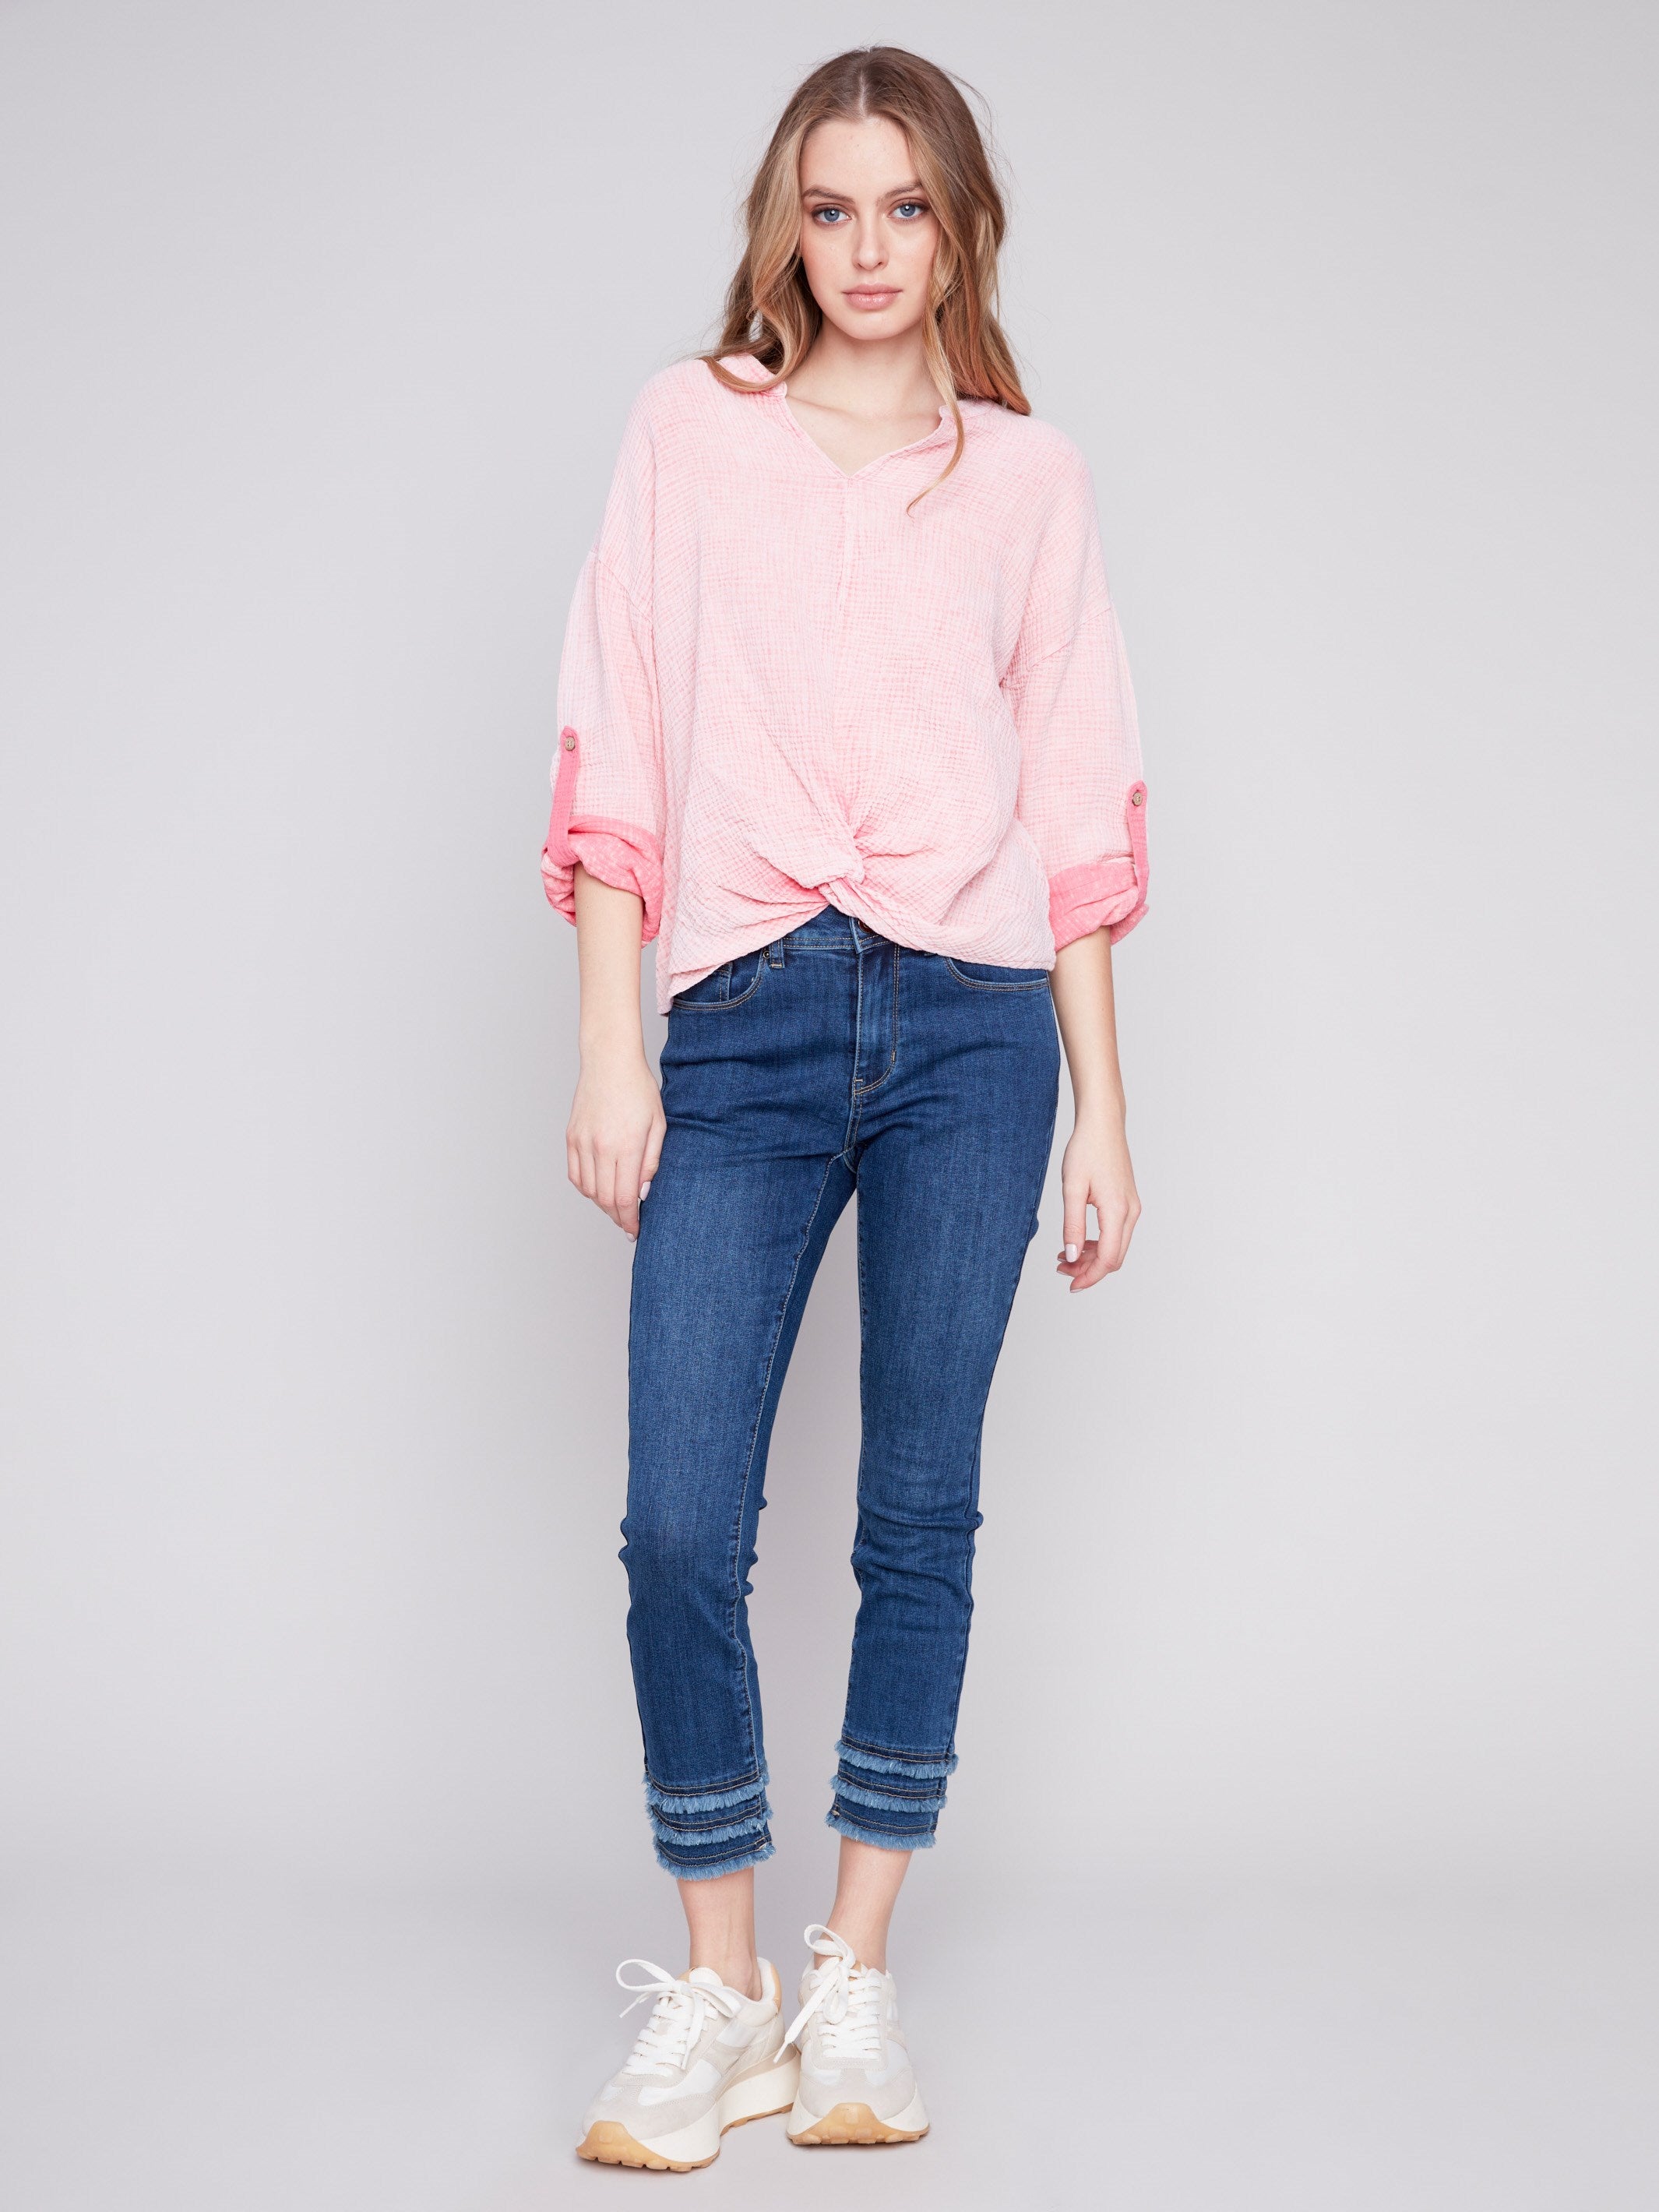 Bubble Cotton Blouse with Front Twist - Flamingo - Charlie B Collection Canada - Image 3